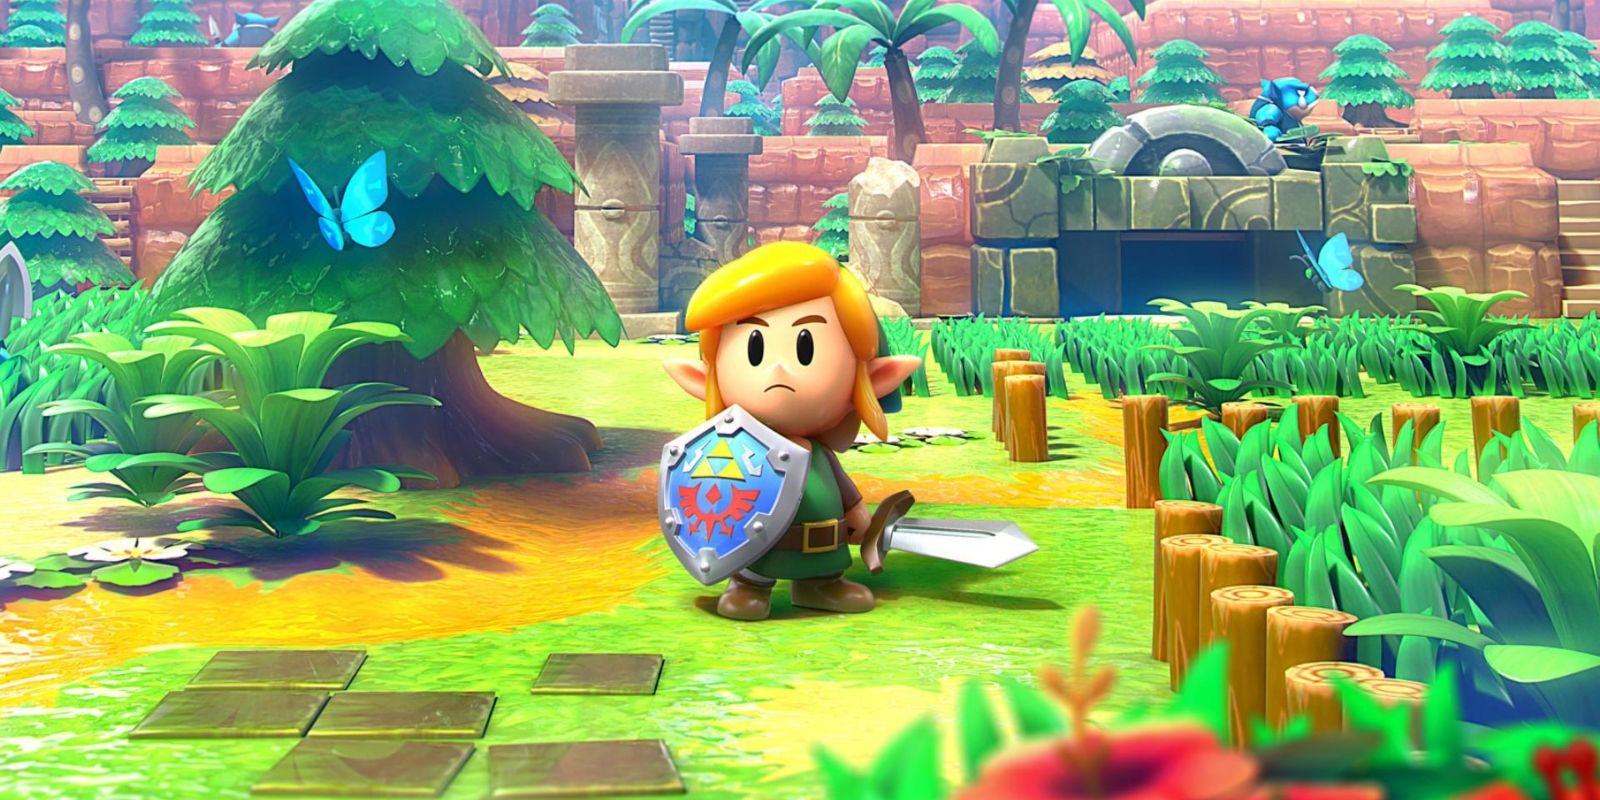 A promo image from the game featuring young Link